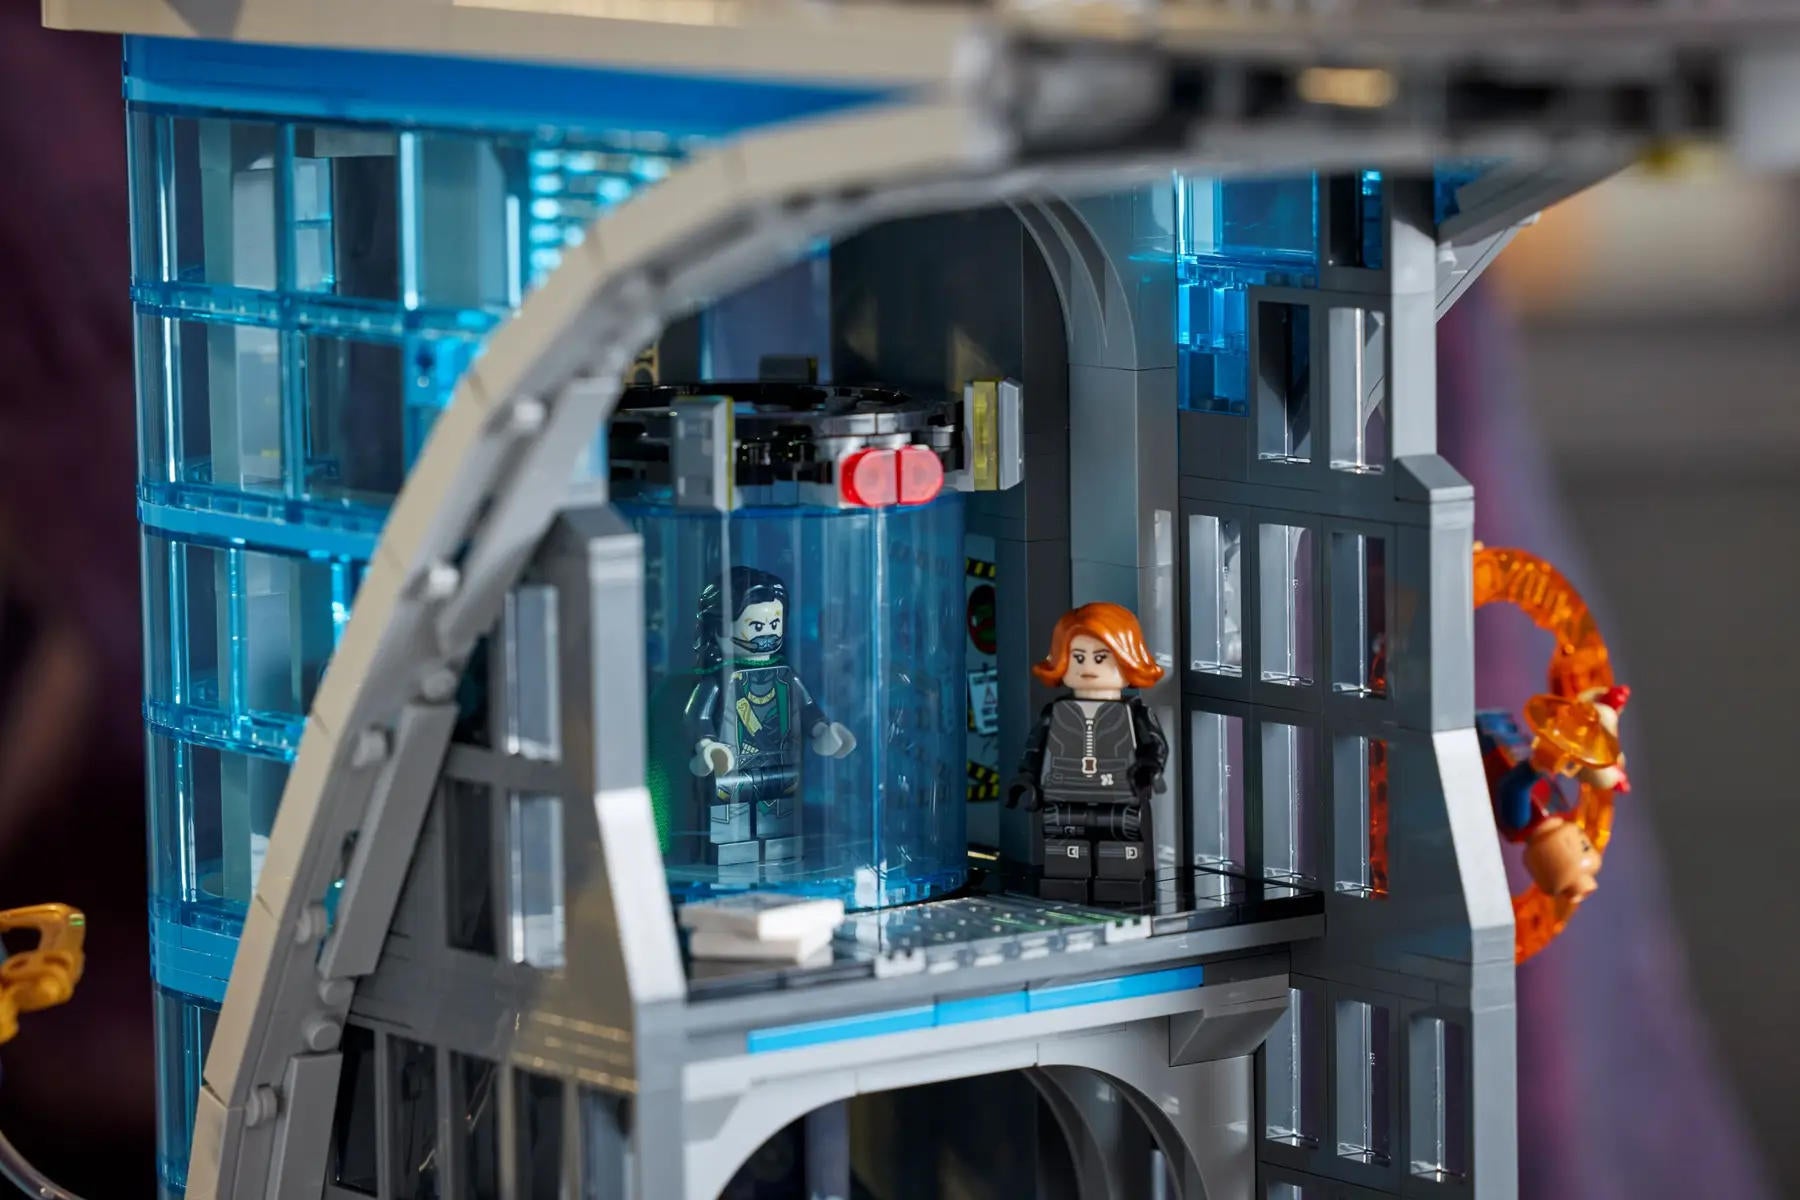 Will you be buying the $525 Lego Avengers Tower? 👀 (news source: @pro